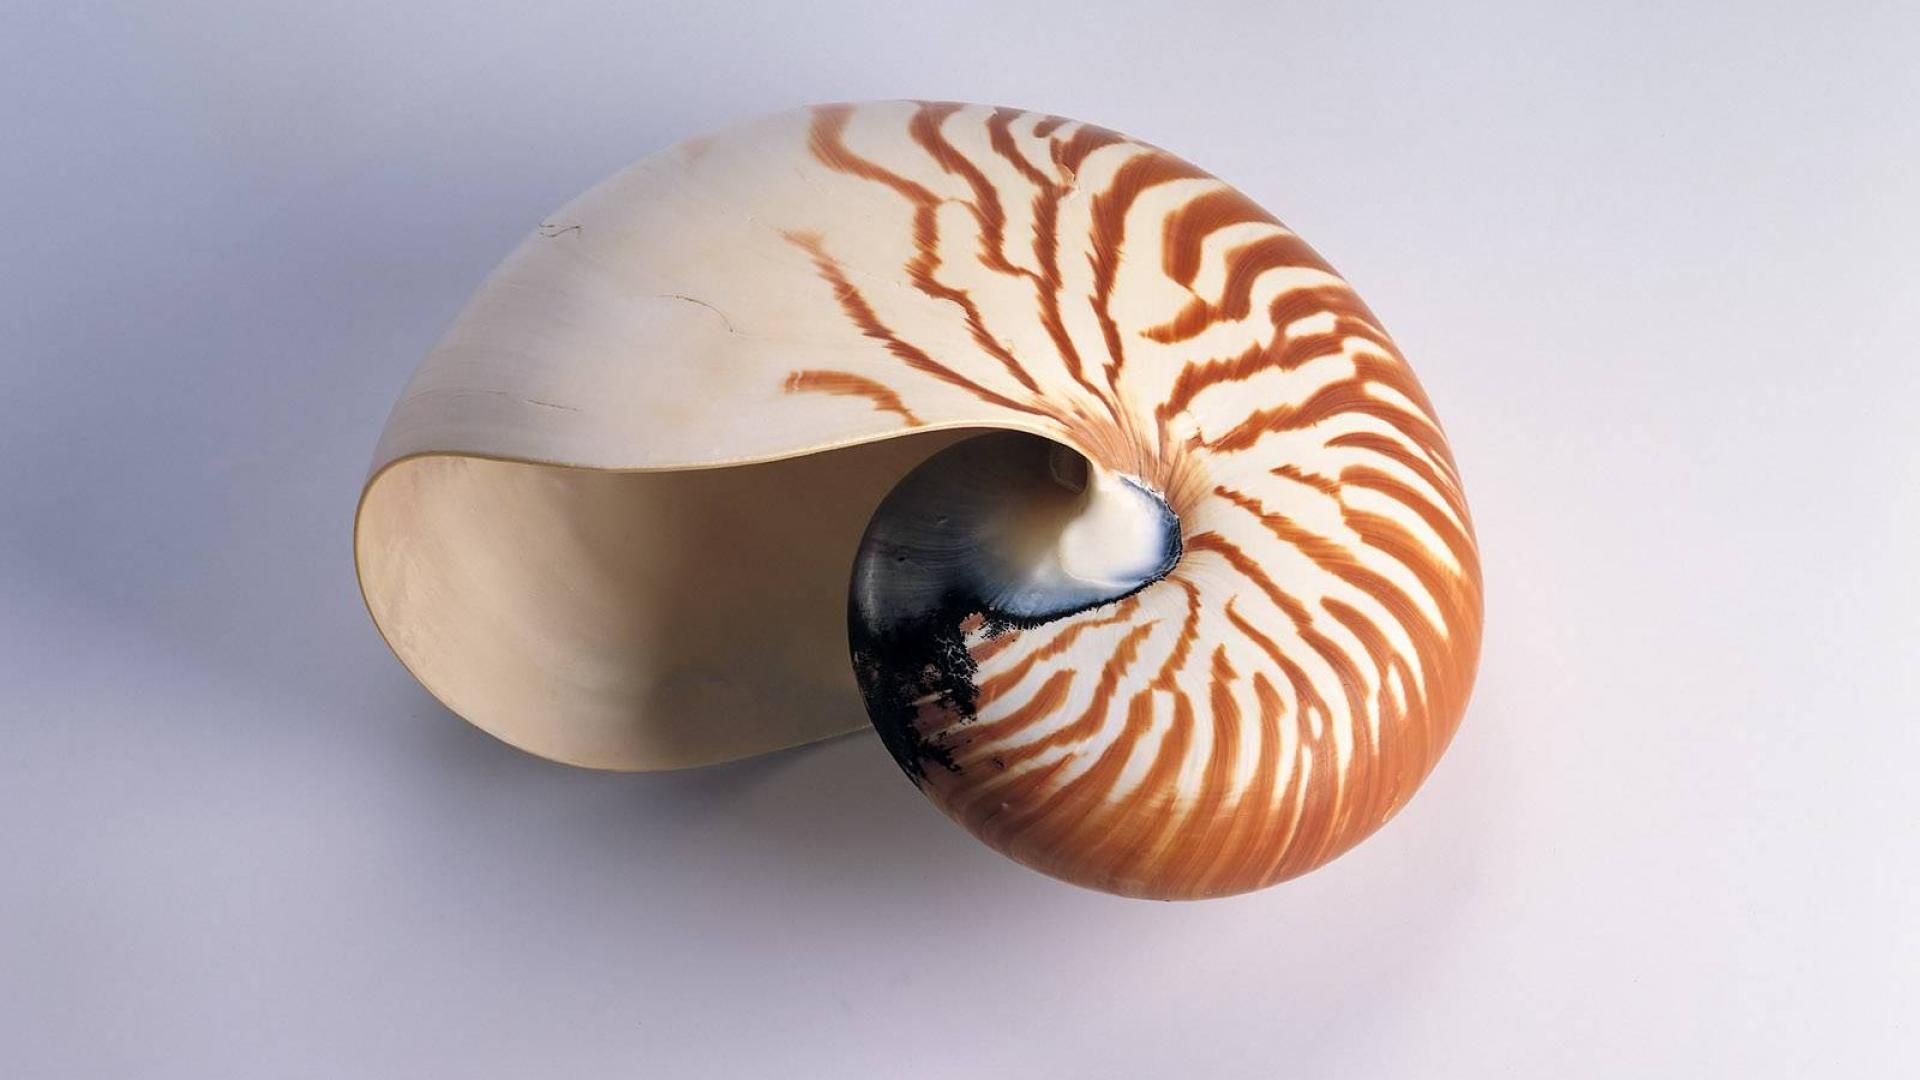 Nautilus shell 1600x1200 wallpaper - (#16102) - High Quality and ...